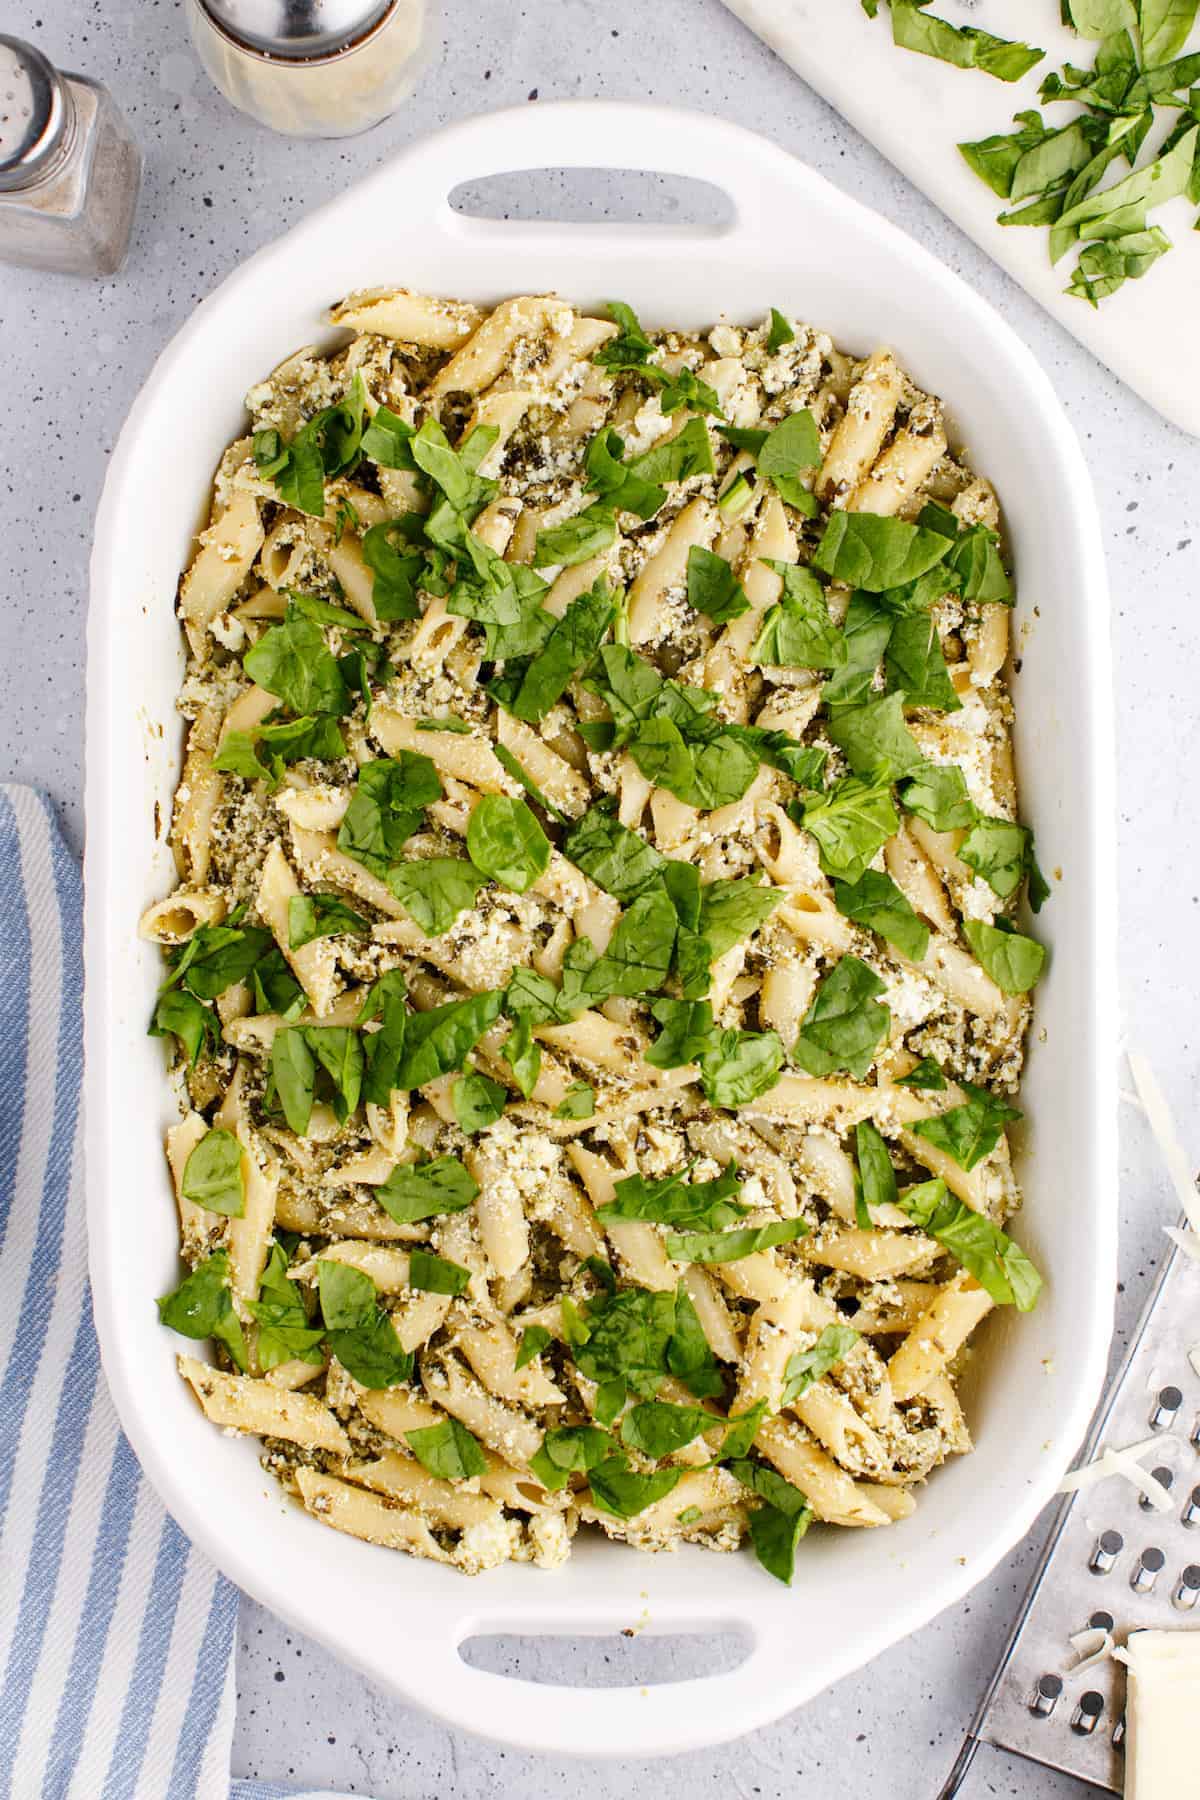 the pasta is topped with chopped spinach